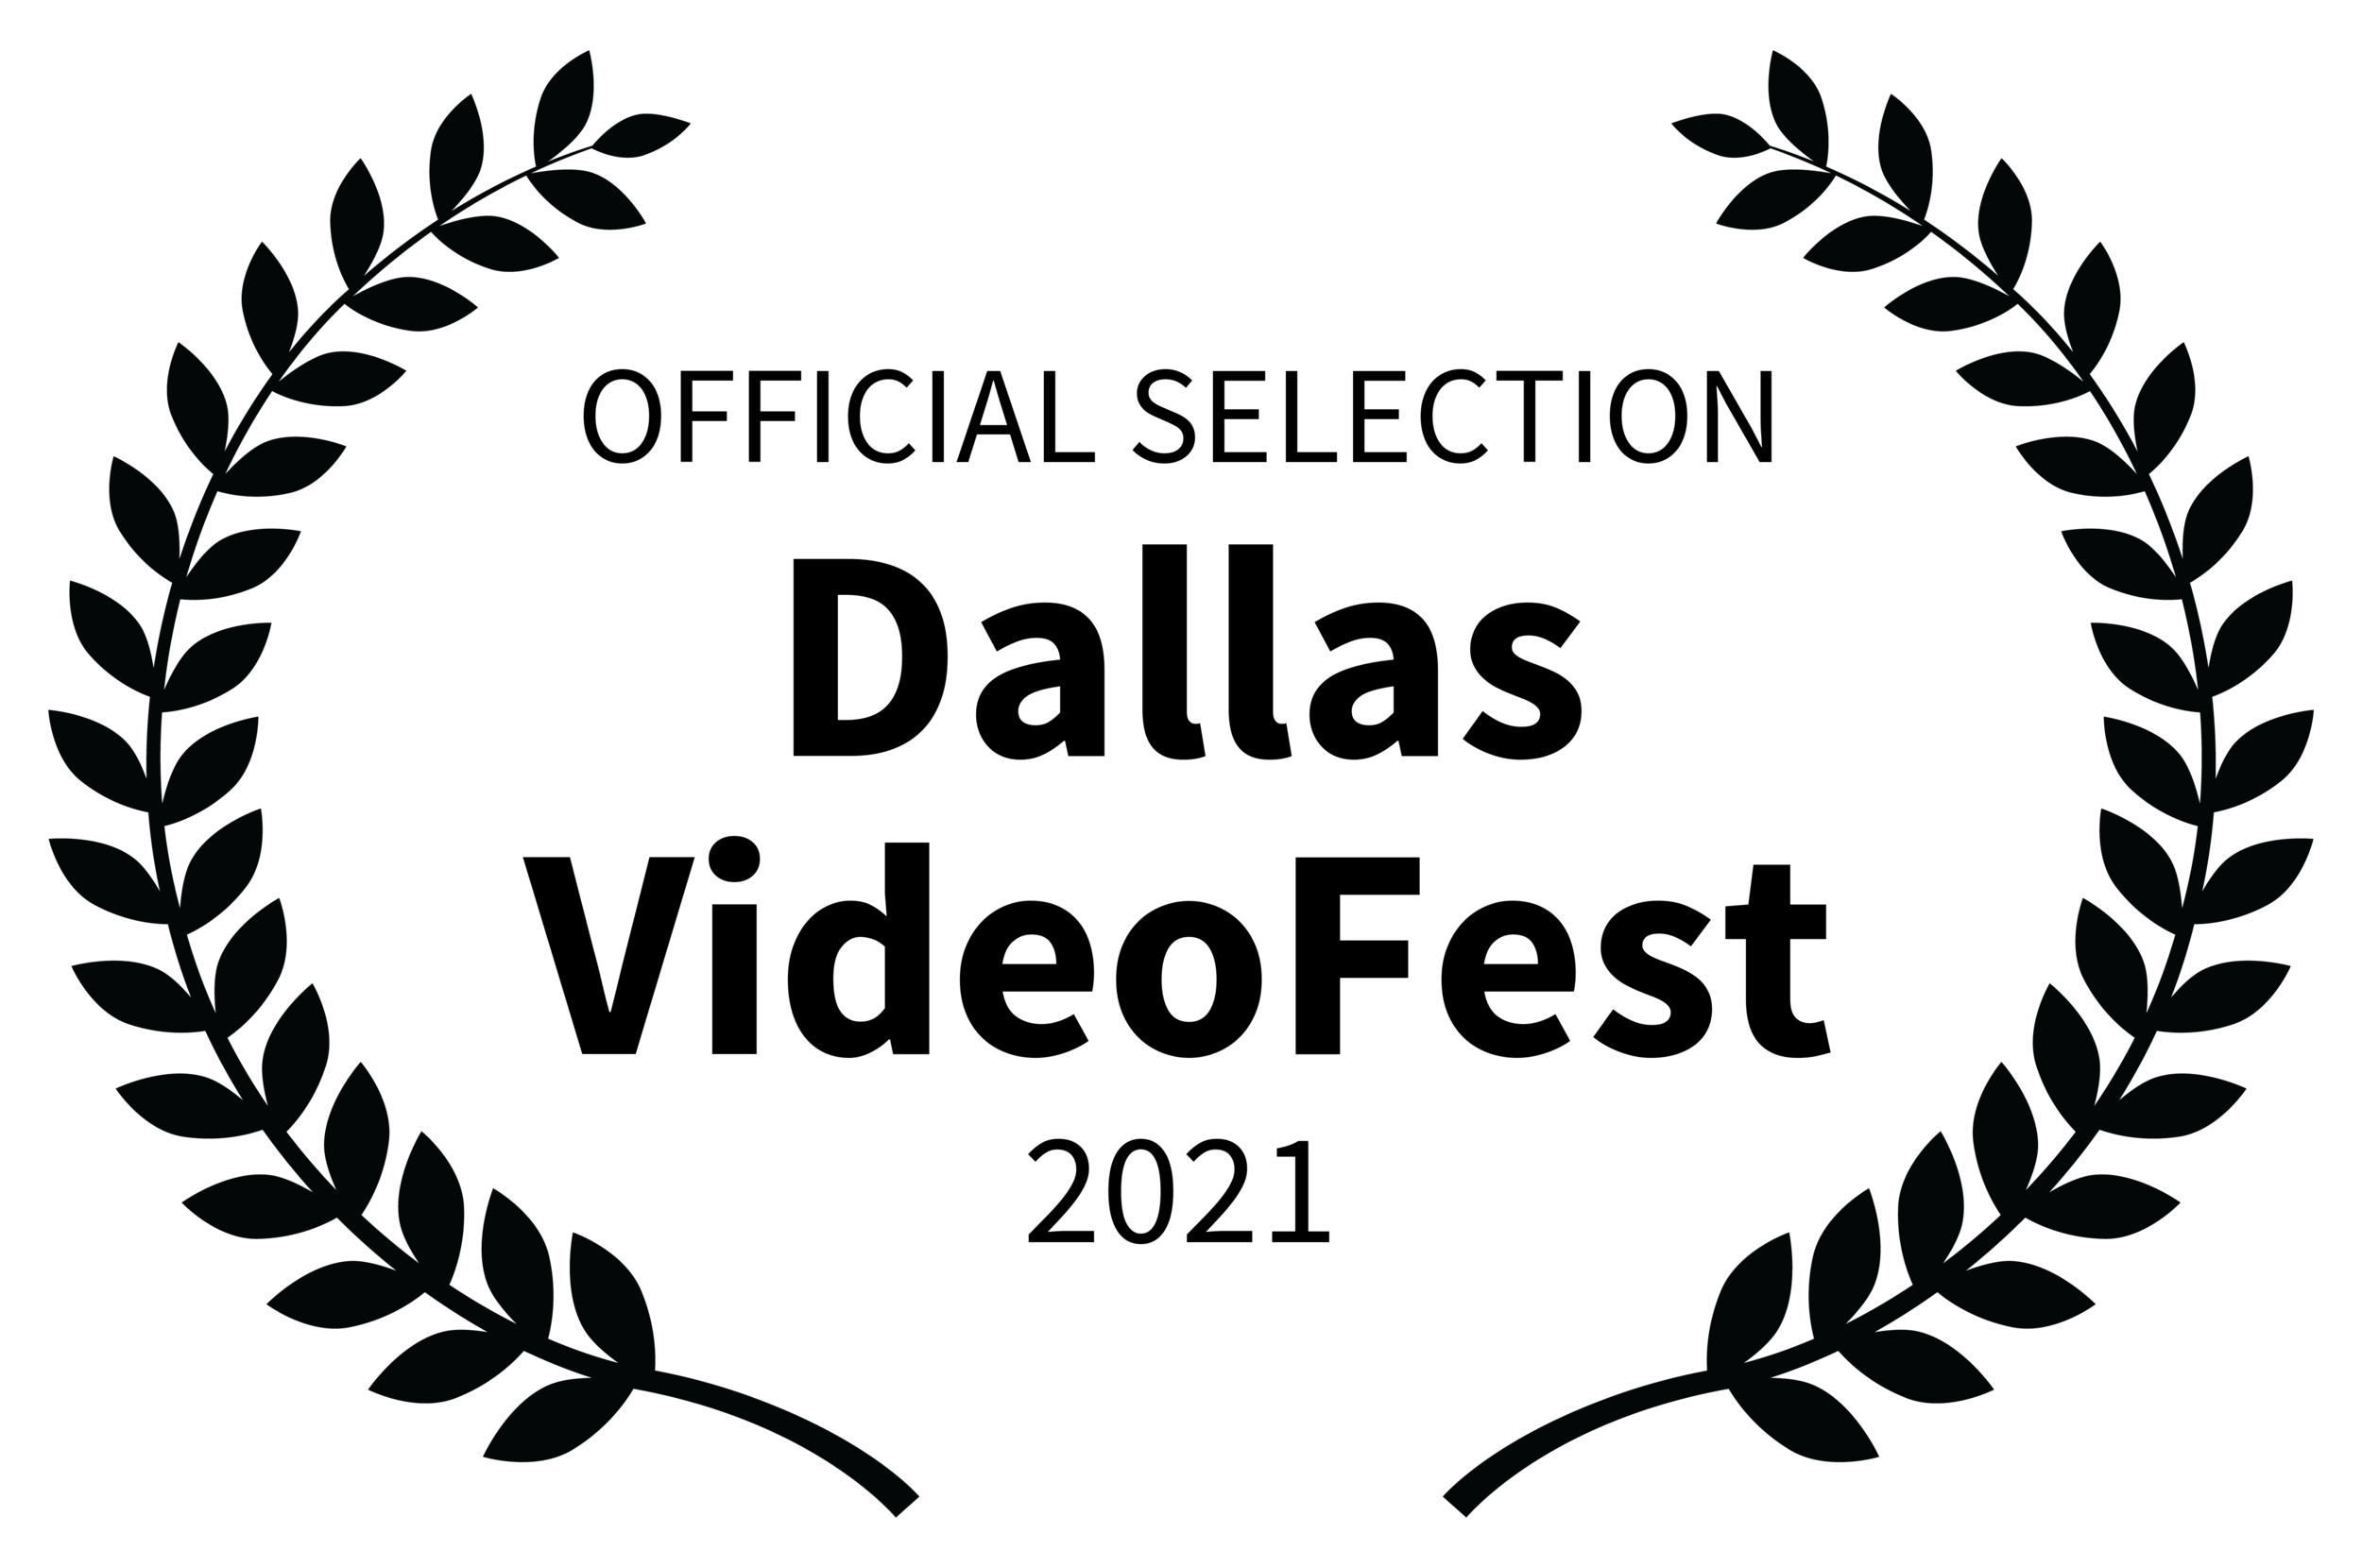 OFFICIALSELECTION-DallasVideoFest-2021.png